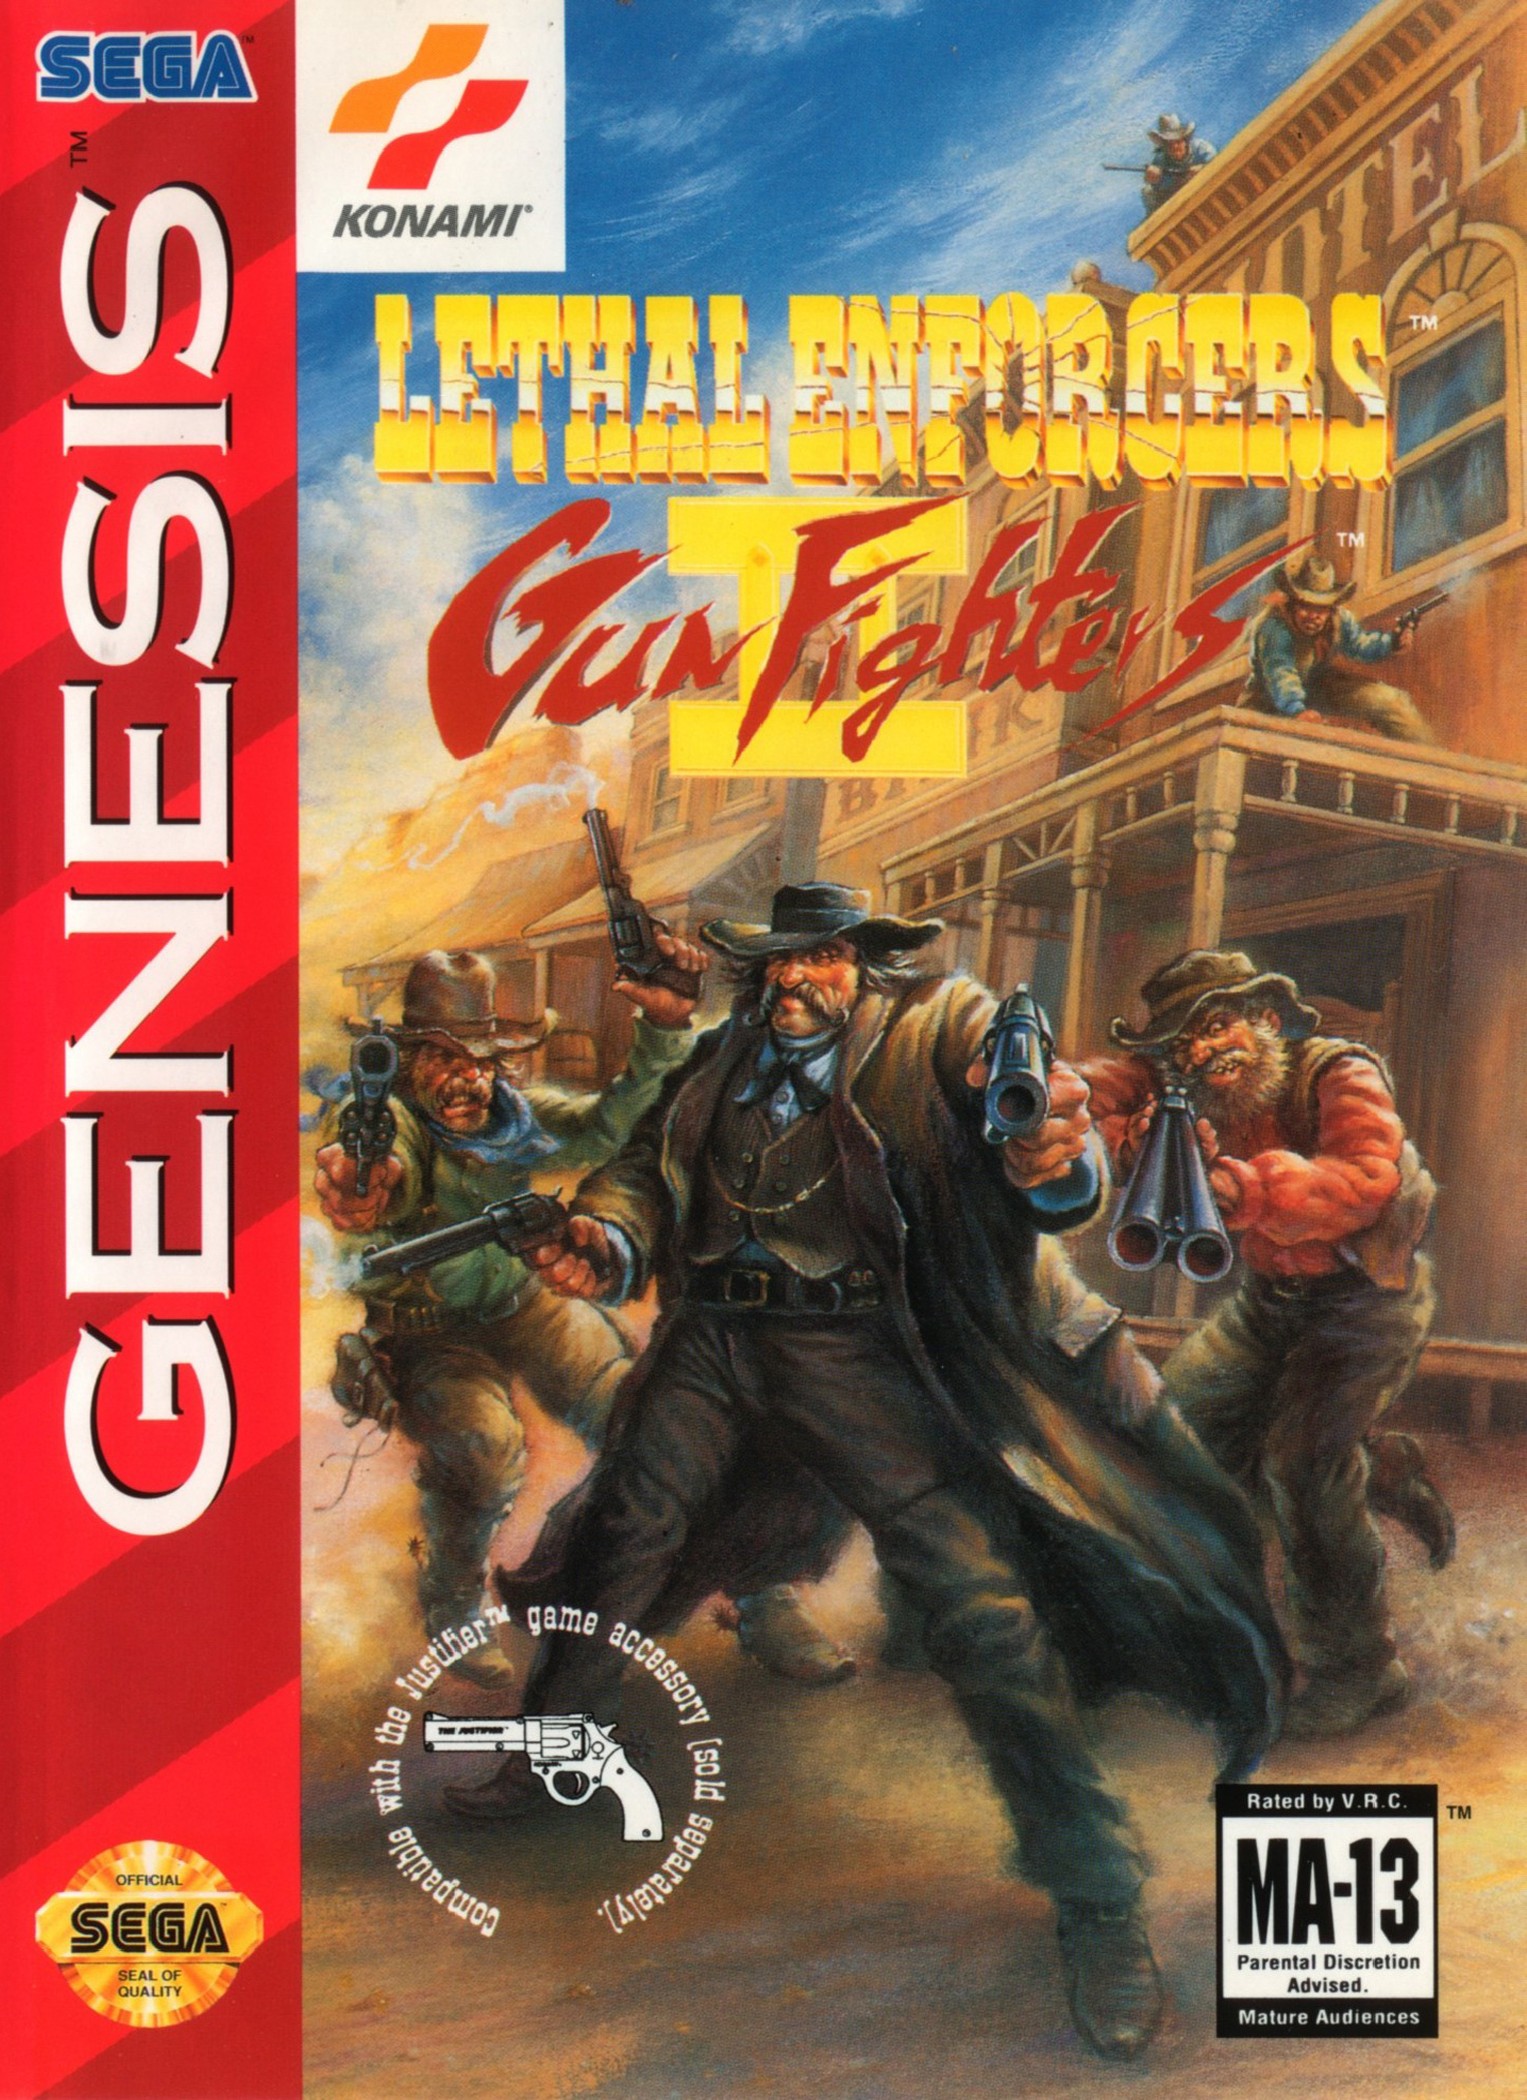 mame lethal enforcers 2 will not load